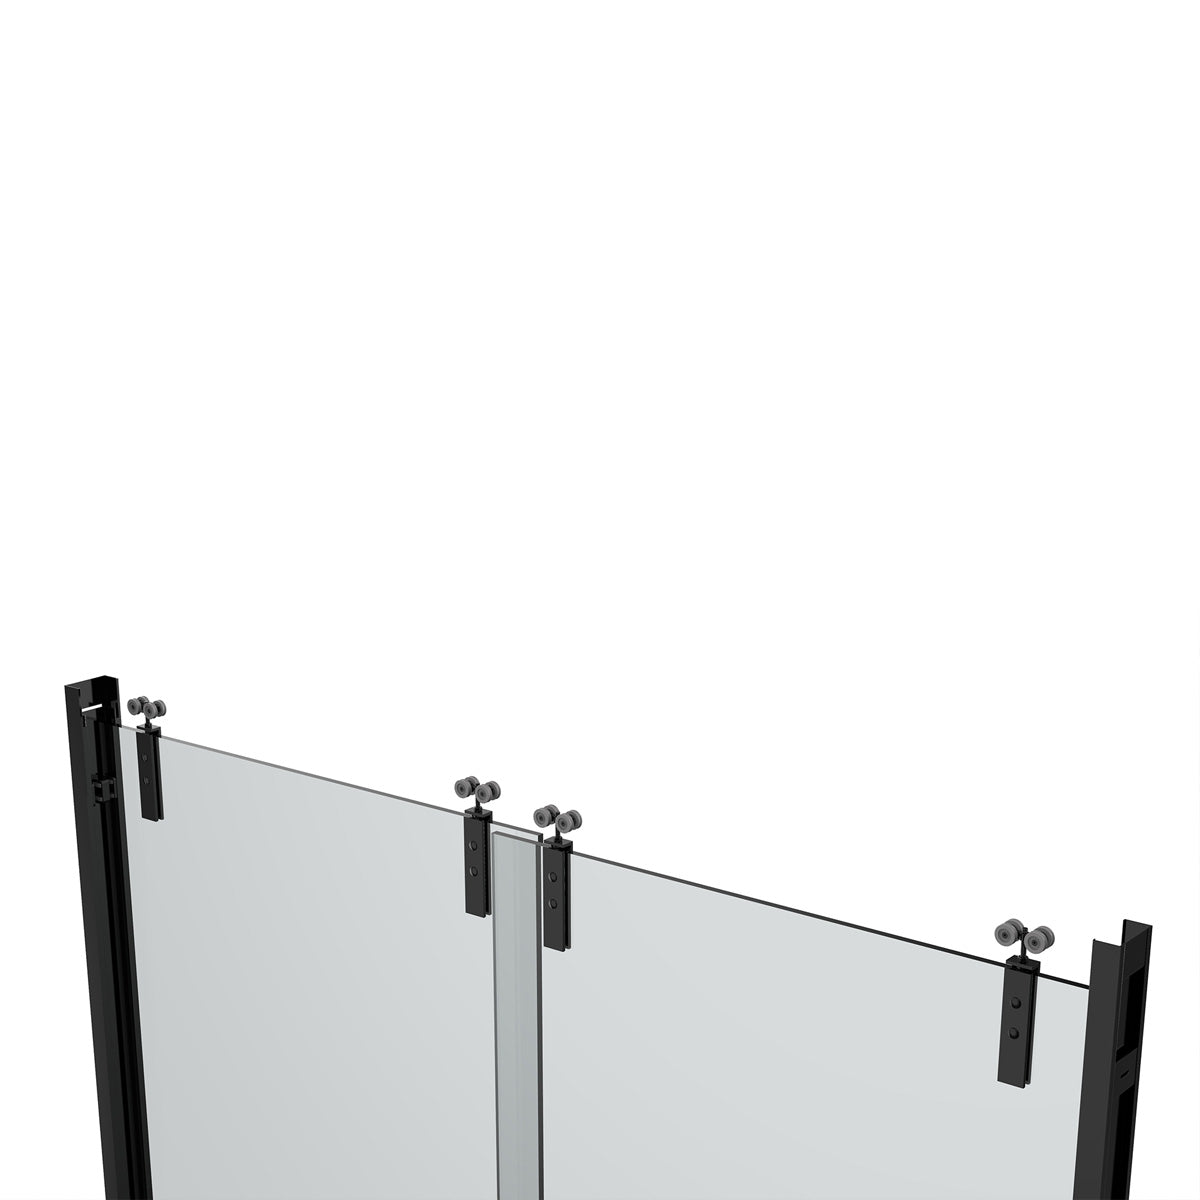 60" Bypass Tub Door with Klearteck Treatment (3/8" Thickness) (Matte Black) AC23 Series - iStyle Bath